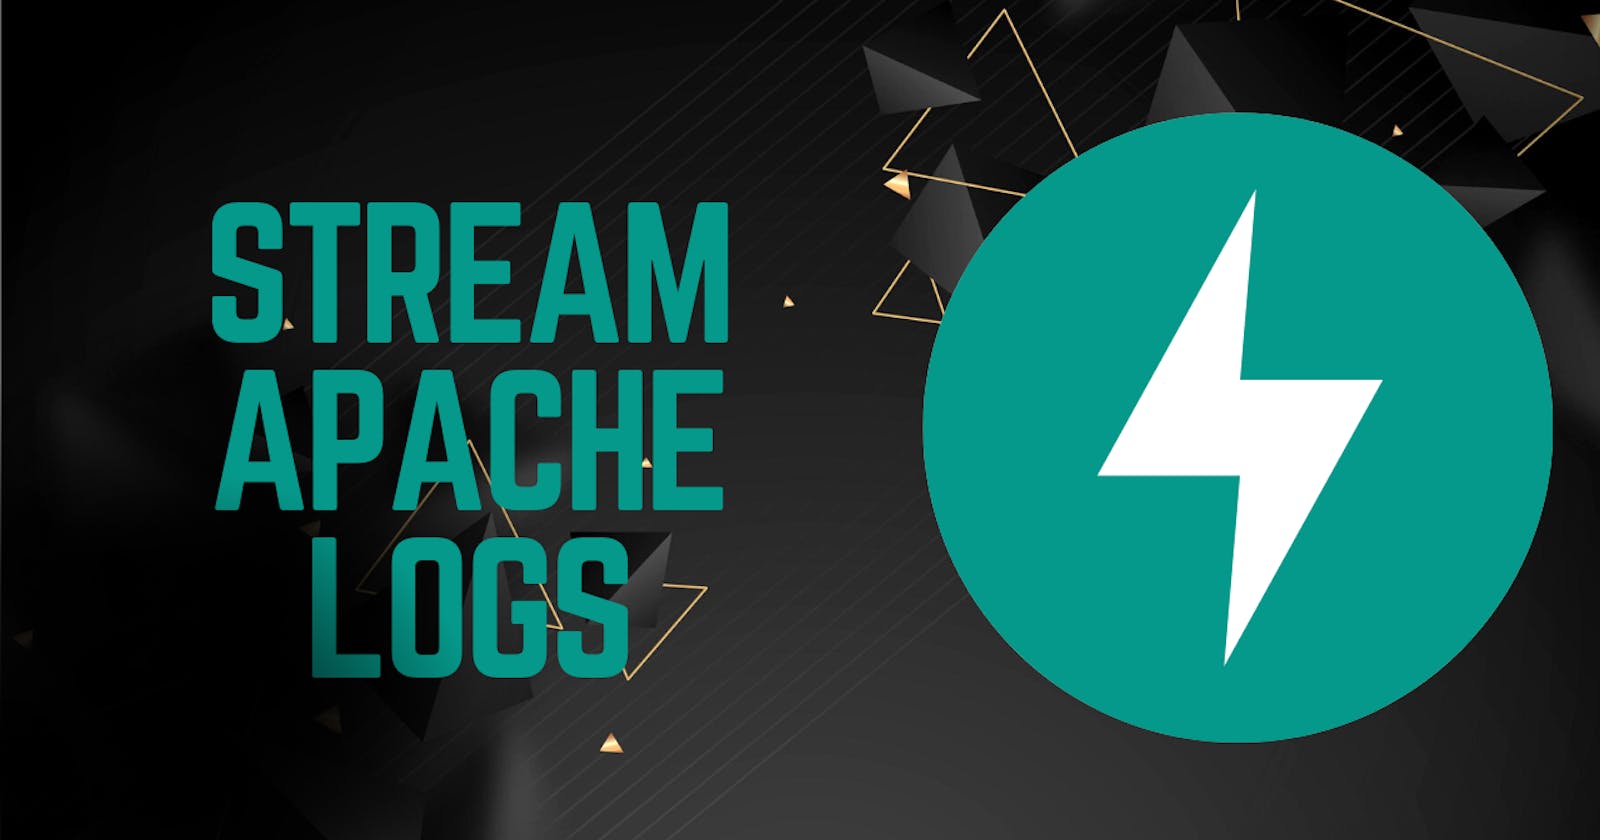 Real-Time Apache Log Streaming with FastAPI